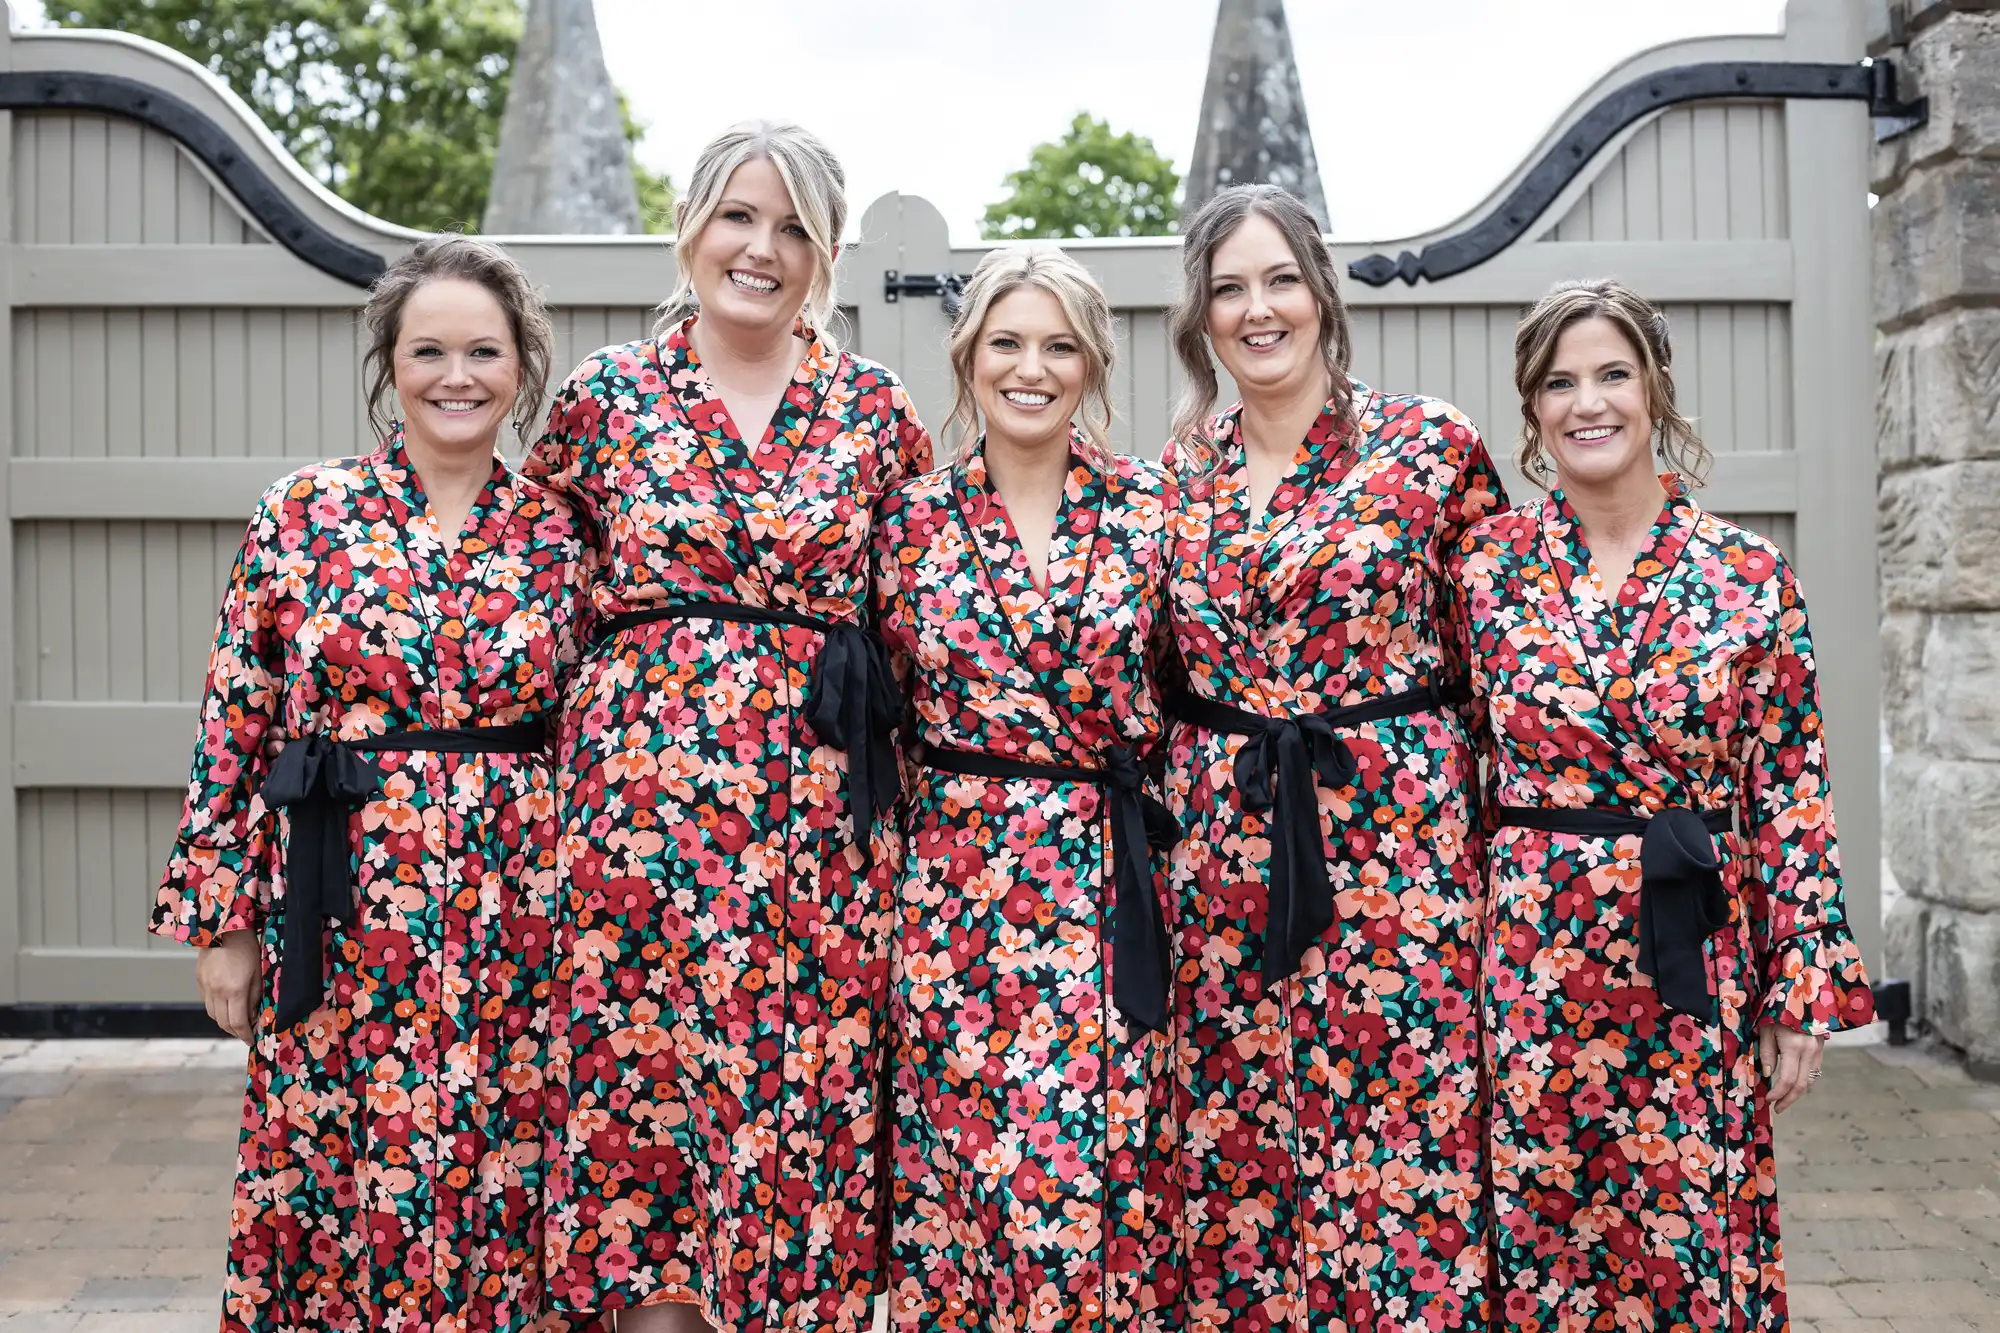 Five women in matching floral dresses smiling in front of a stone fence with castle-like spires.